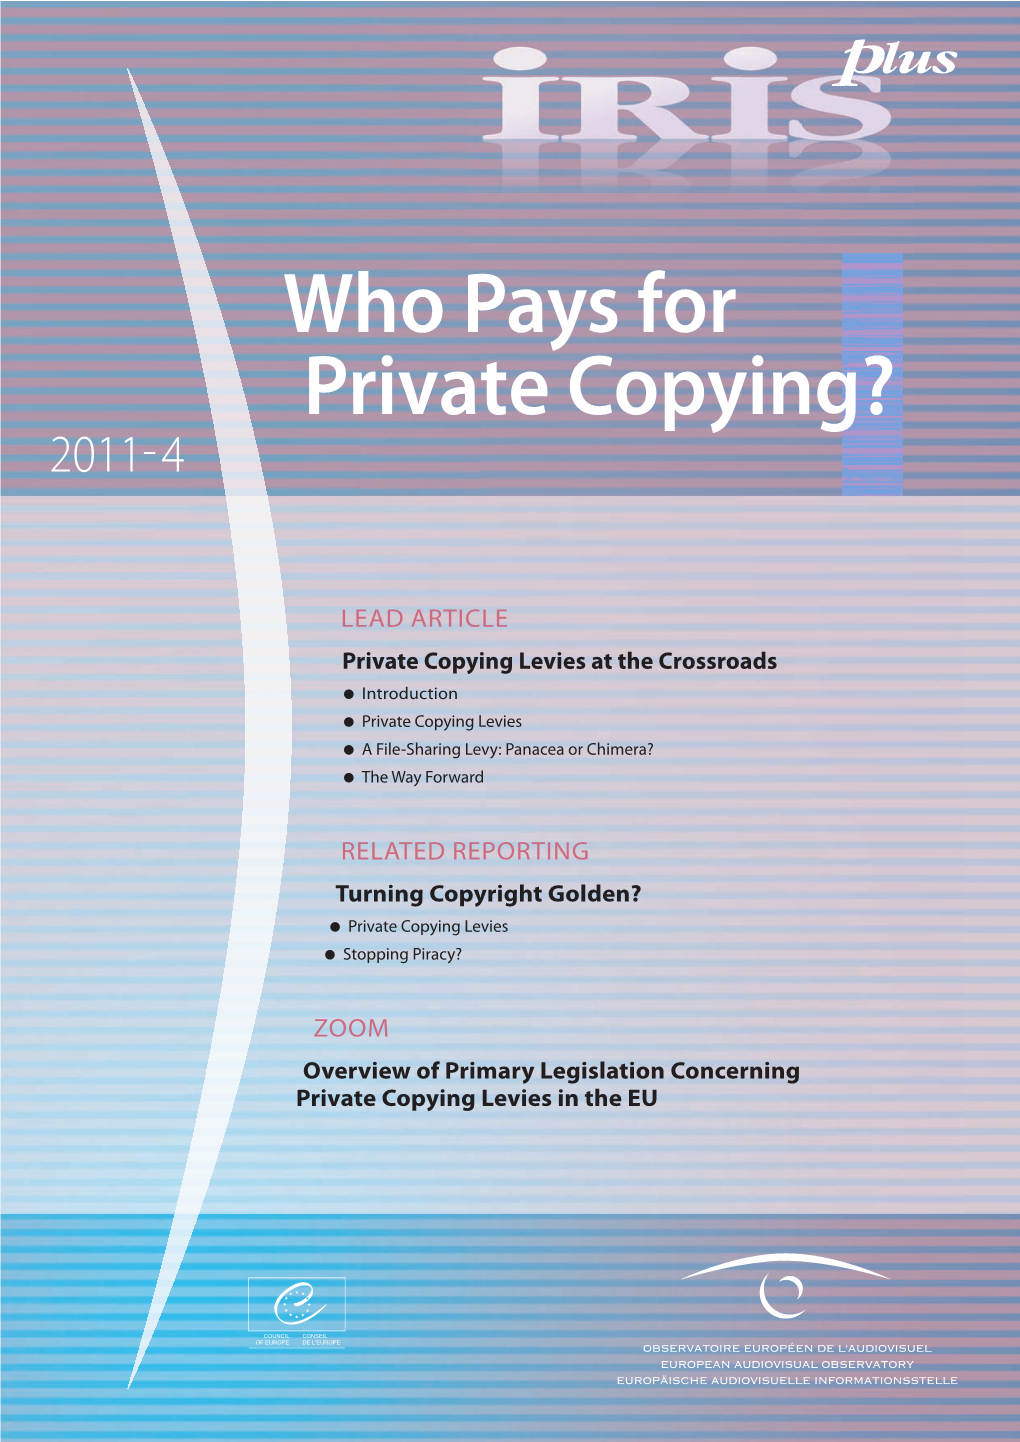 Who Pays for Private Copying? 24,50 € - ISBN 978-92-871-7186-3 IRIS Plus 2011-4 Who Pays for Private Copying?